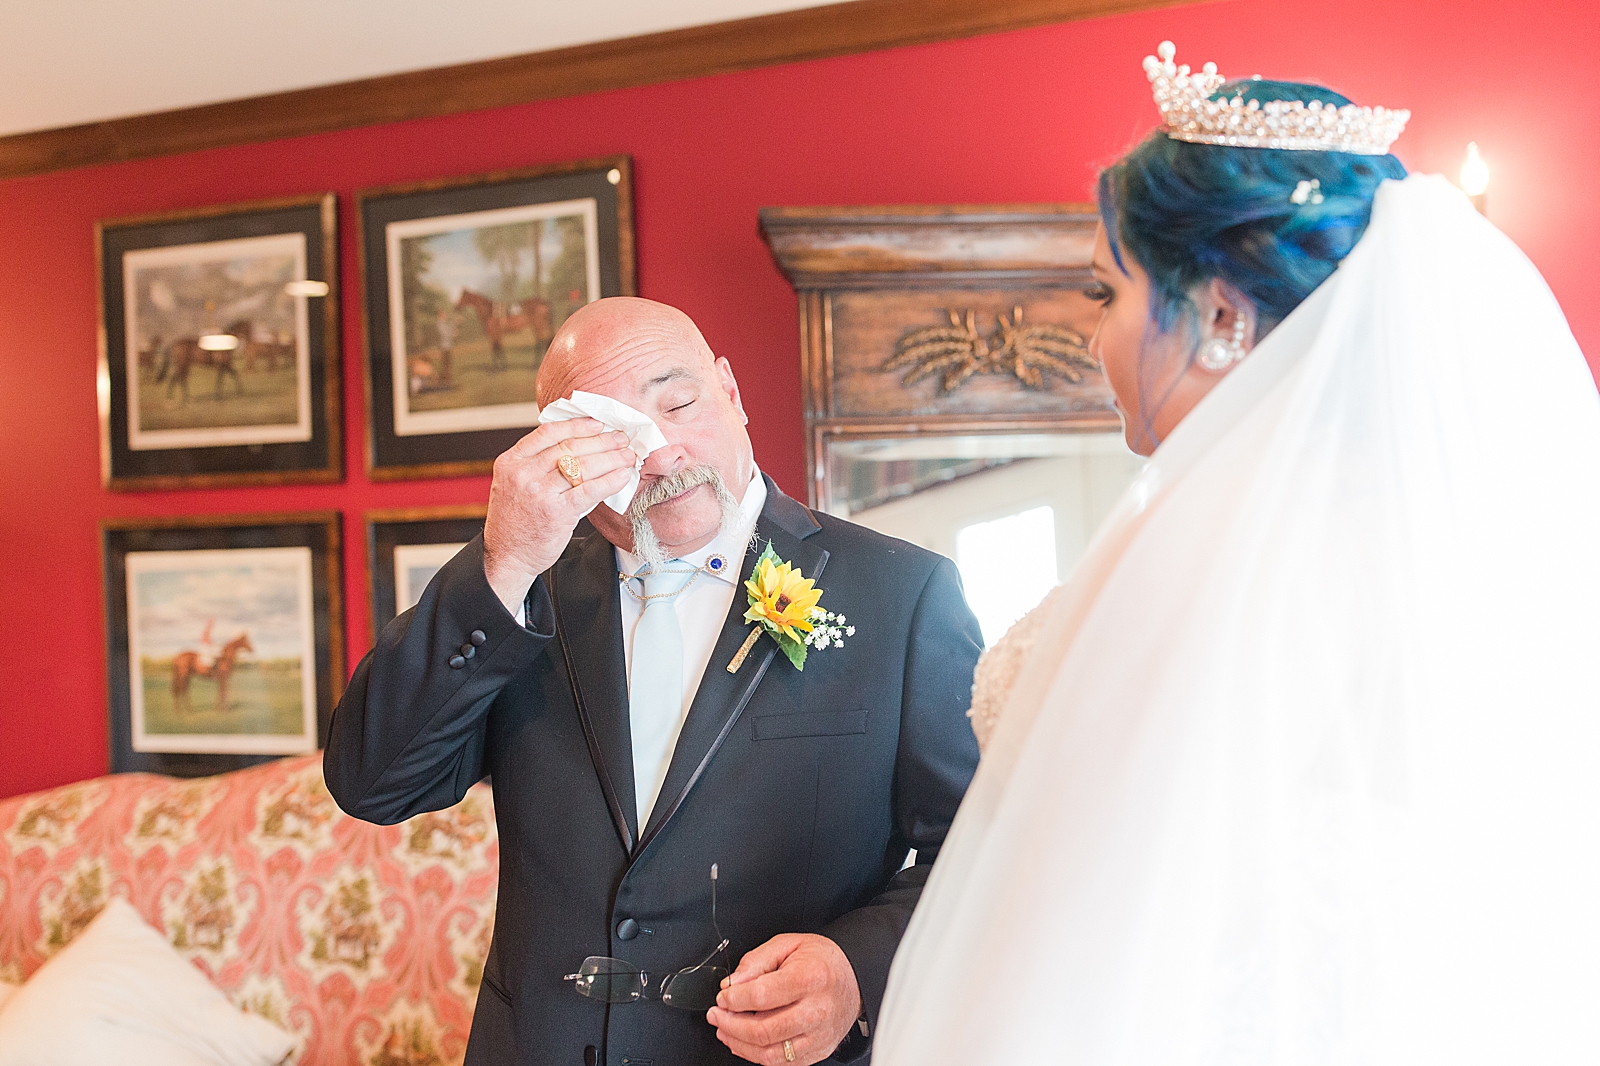 Mooresville Wedding Father of Bride wiping tears Photo